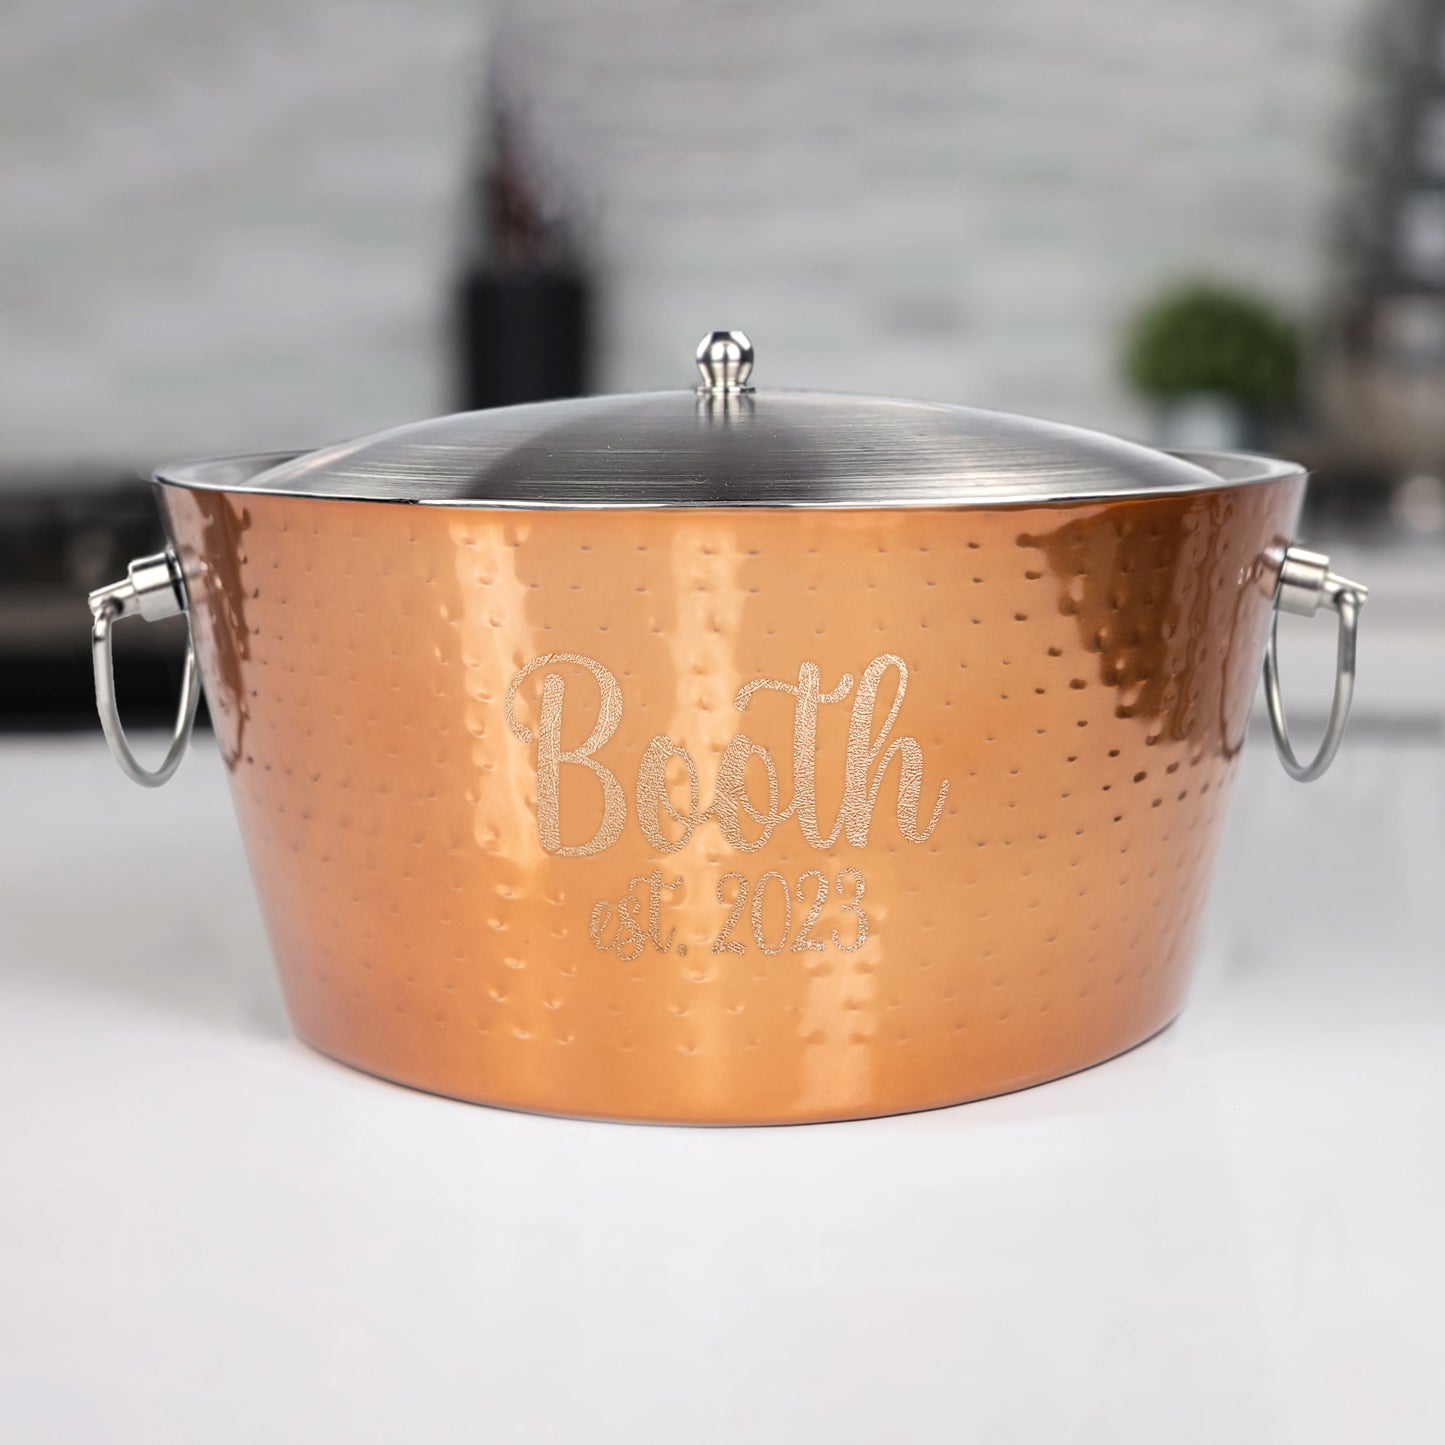 Personalized Ice Bucket with Lid - Rose Copper Anchored by BREKX